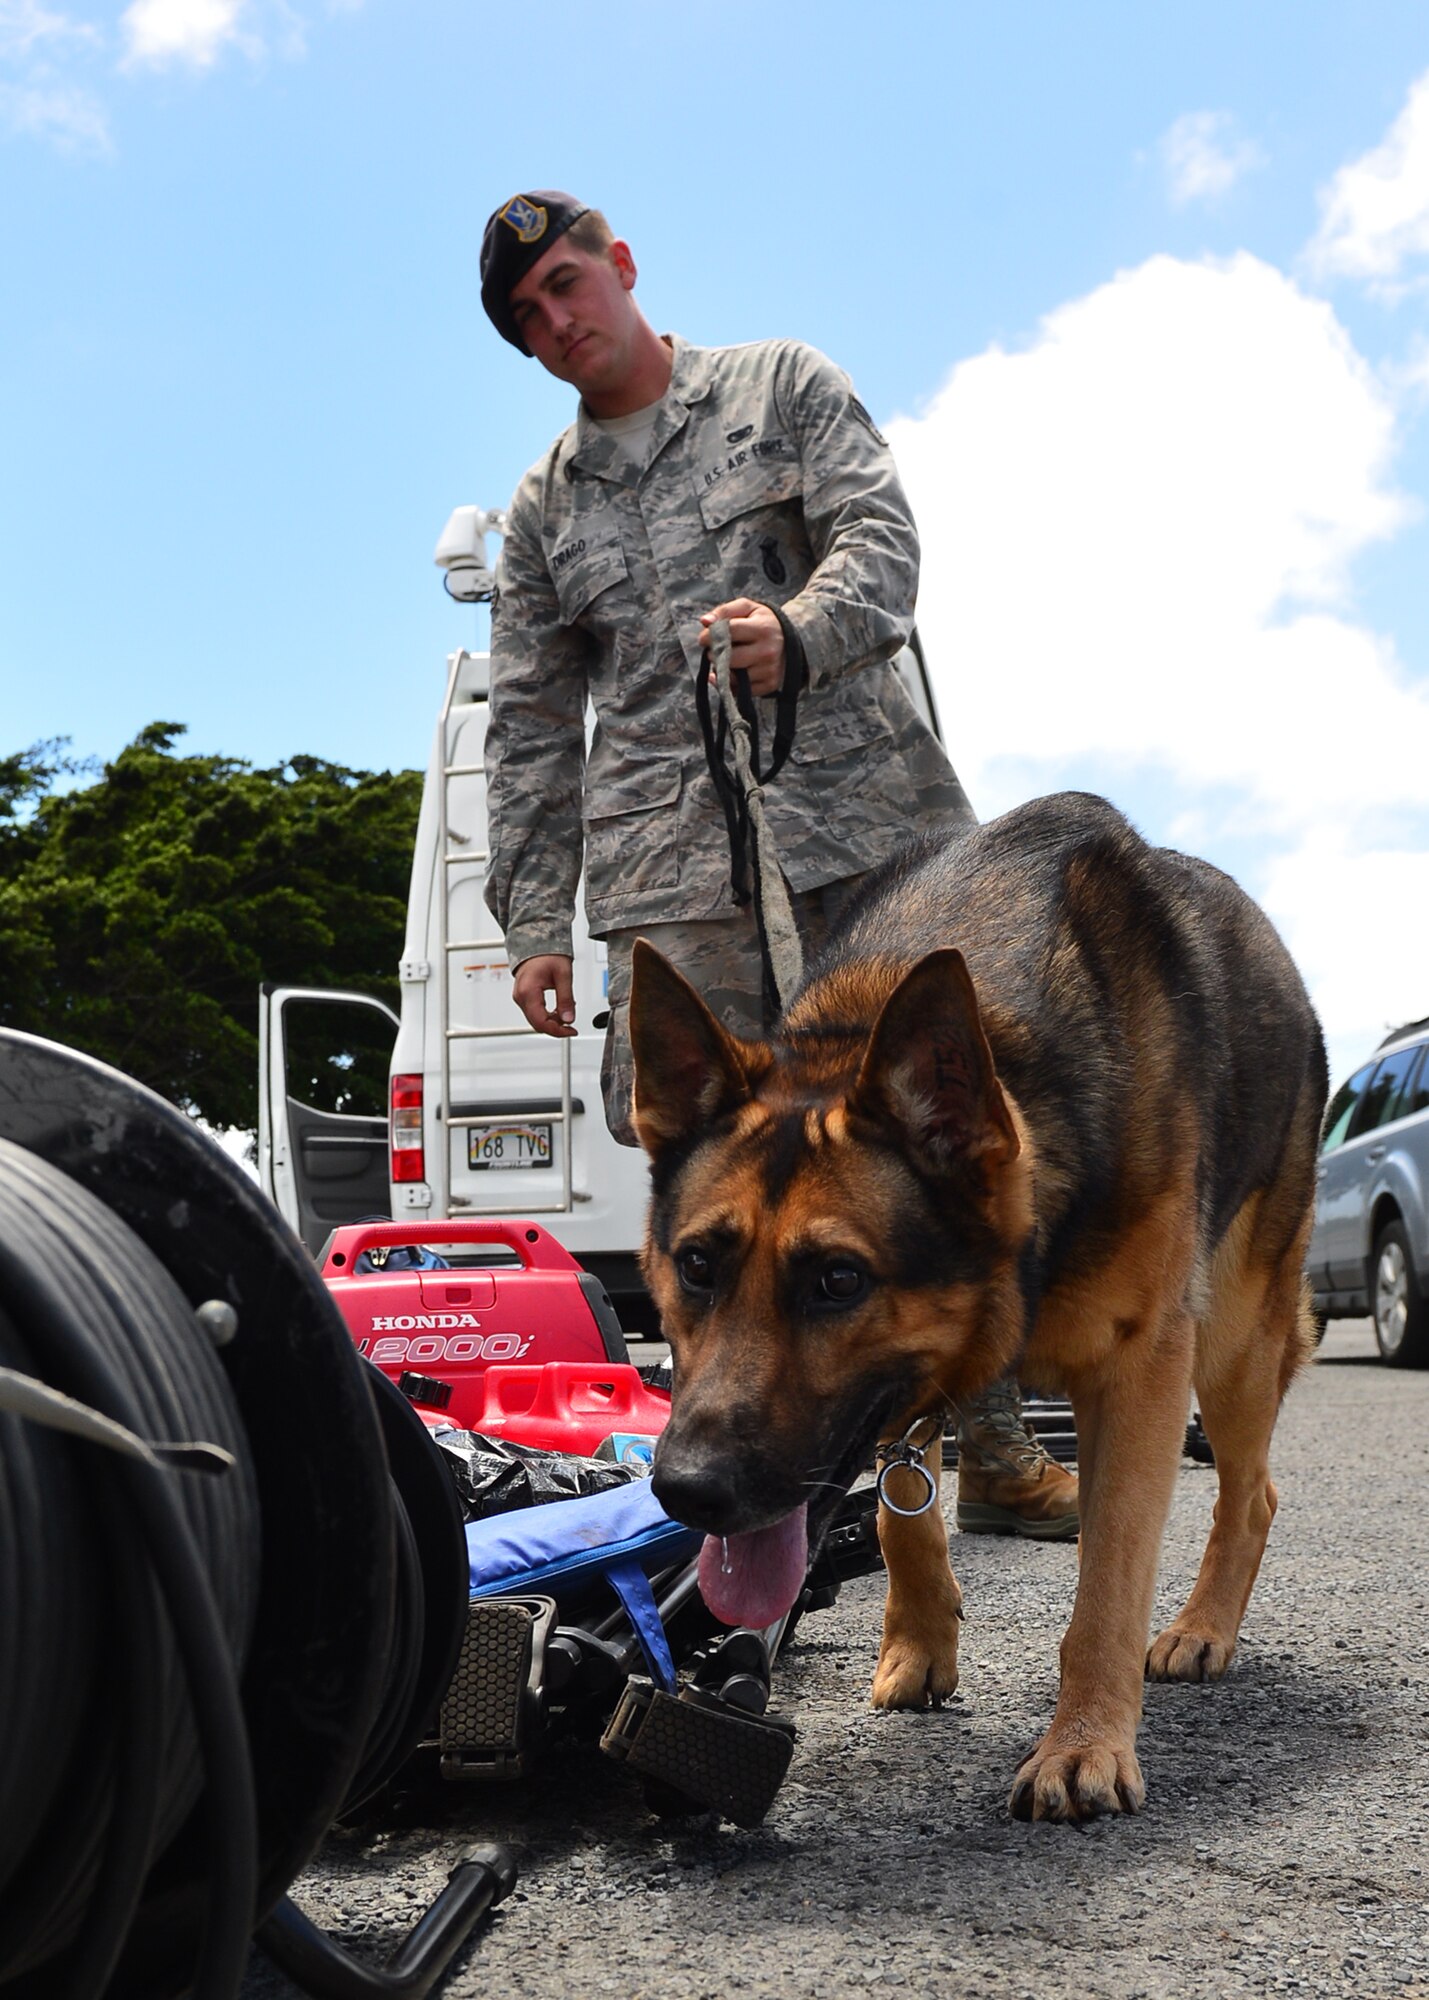 Senior Airman Joseph Drago, 647th Security Forces Squadron military working dog handler, and Dollar, 647th Security Forces Squadron military working dog, conduct an inspection of broadcast equipment on Joint Base Pearl Harbor-Hickam, Hawaii, Aug. 31, 2016. President Barack Obama was in Hawaii to speak at the Pacific Island Conference of Leaders and the International Union for Conservation of Nature World Conservation Congress. (U.S. Air Force Photo by Tech. Sgt. Aaron Oelrich/Released) 